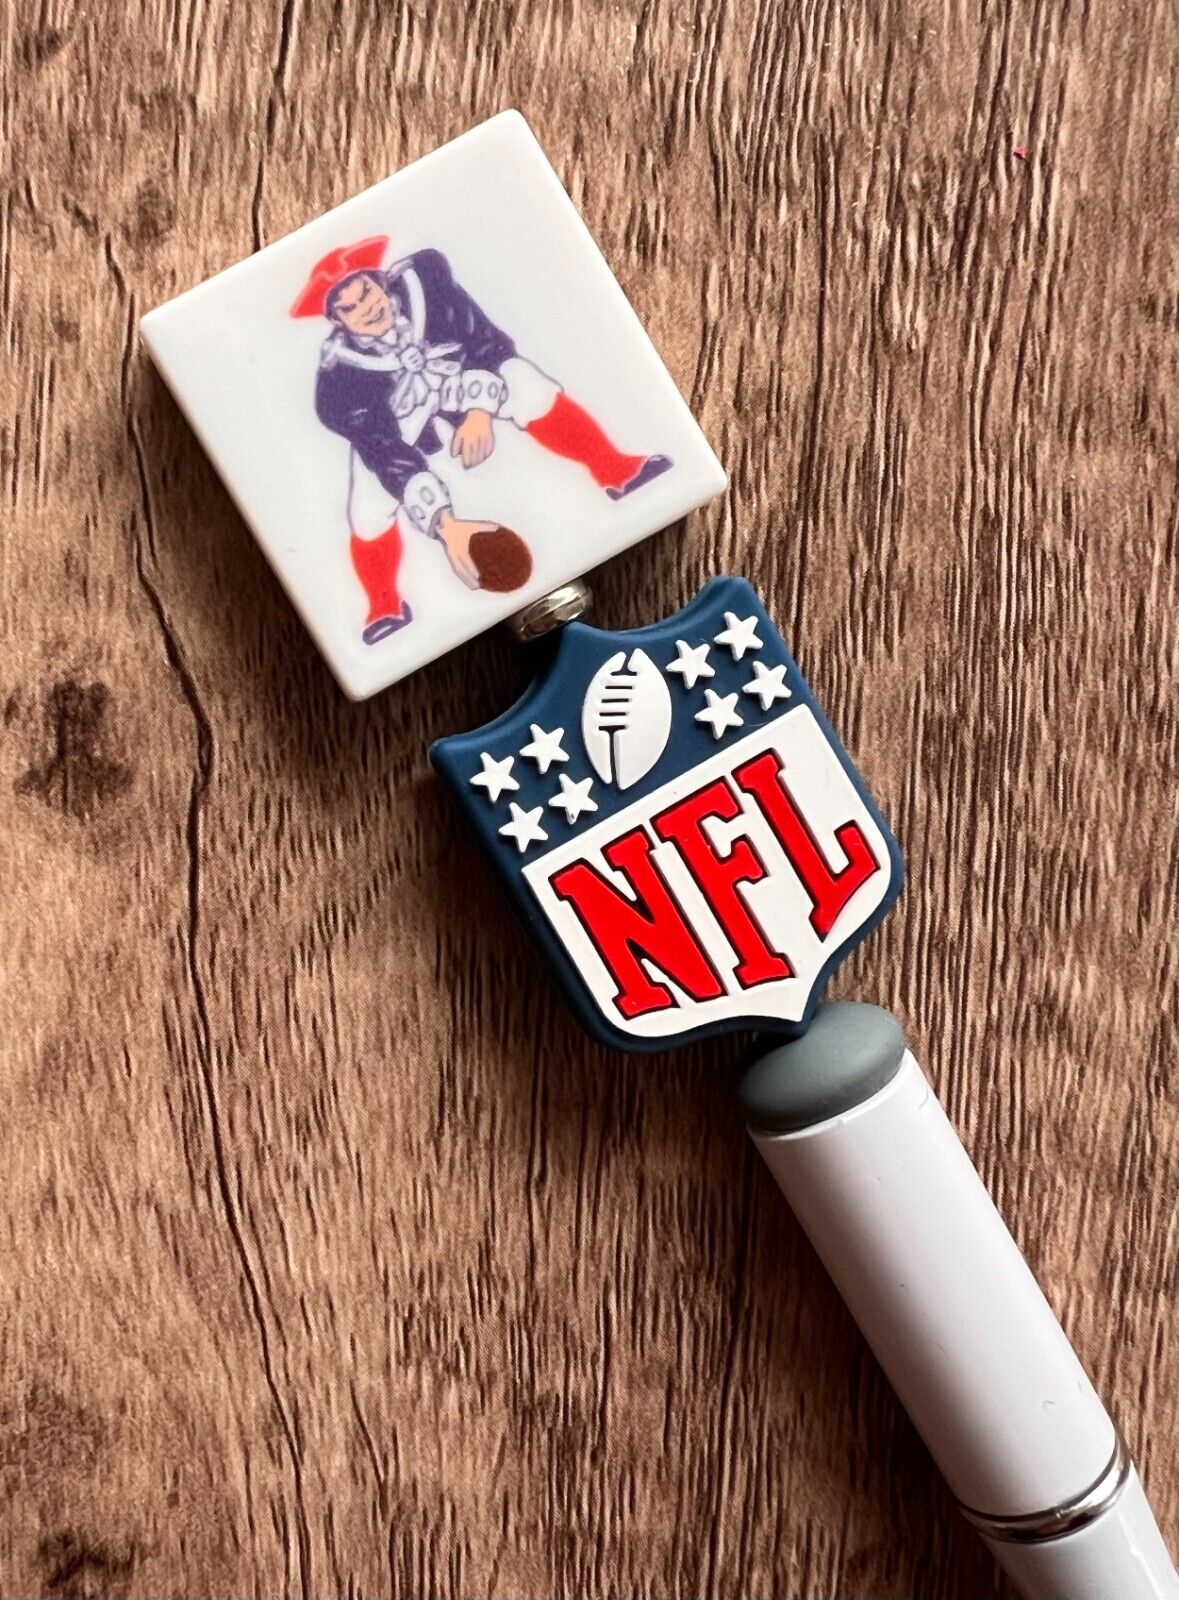 Football pens NFL throwback logos. Patriots & Buccaneers. Gift. Collect.